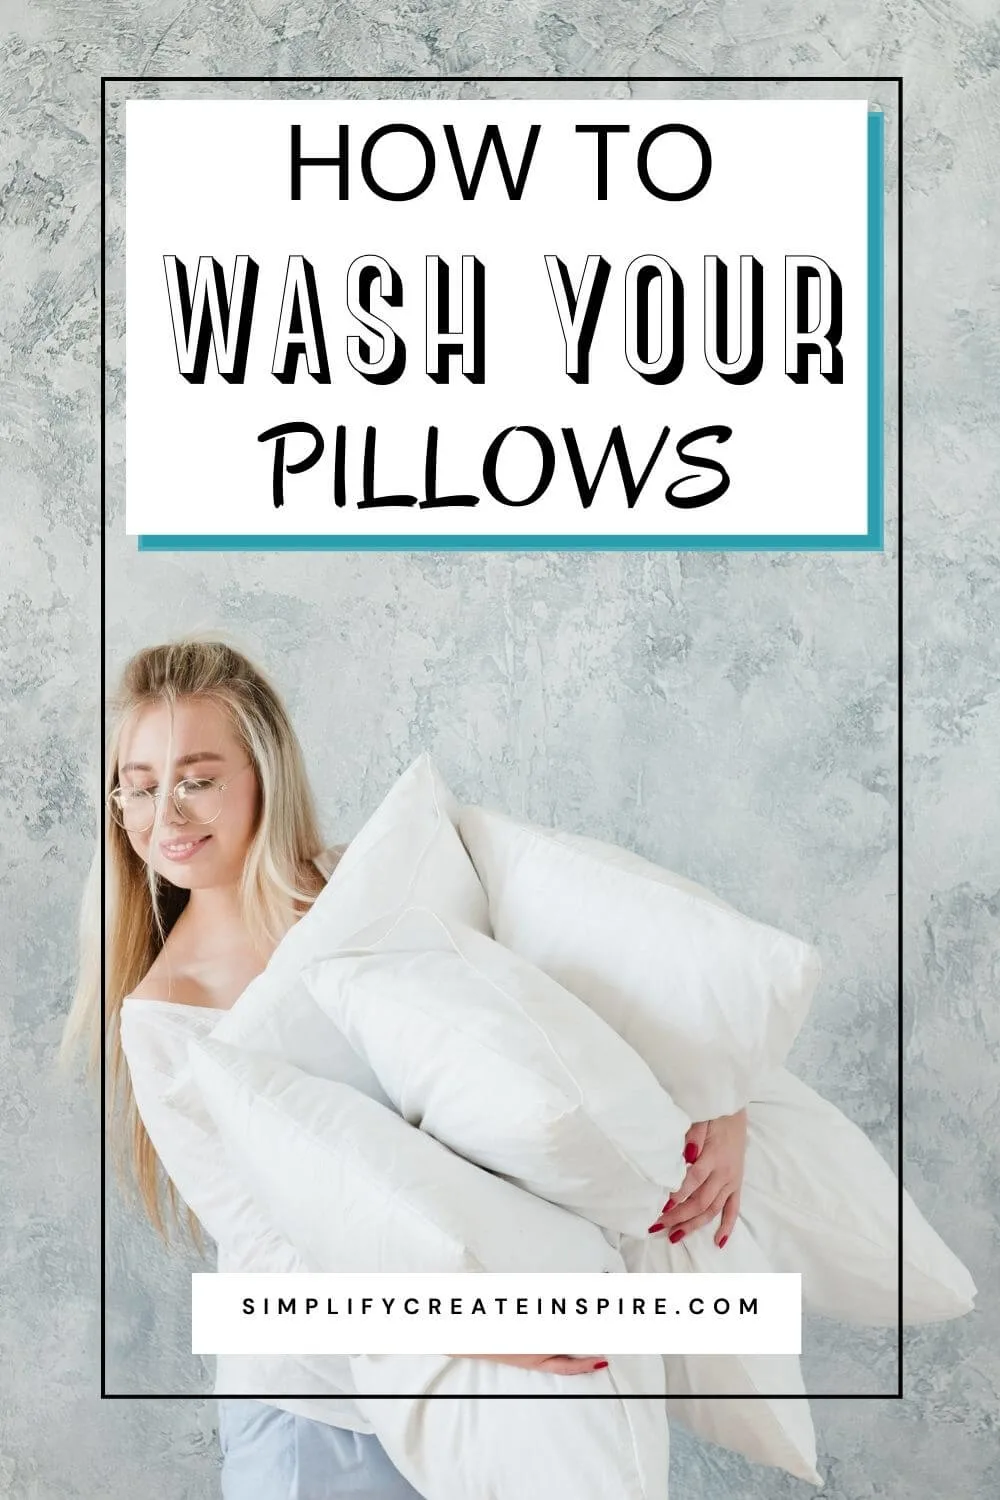 How to wash your pillows